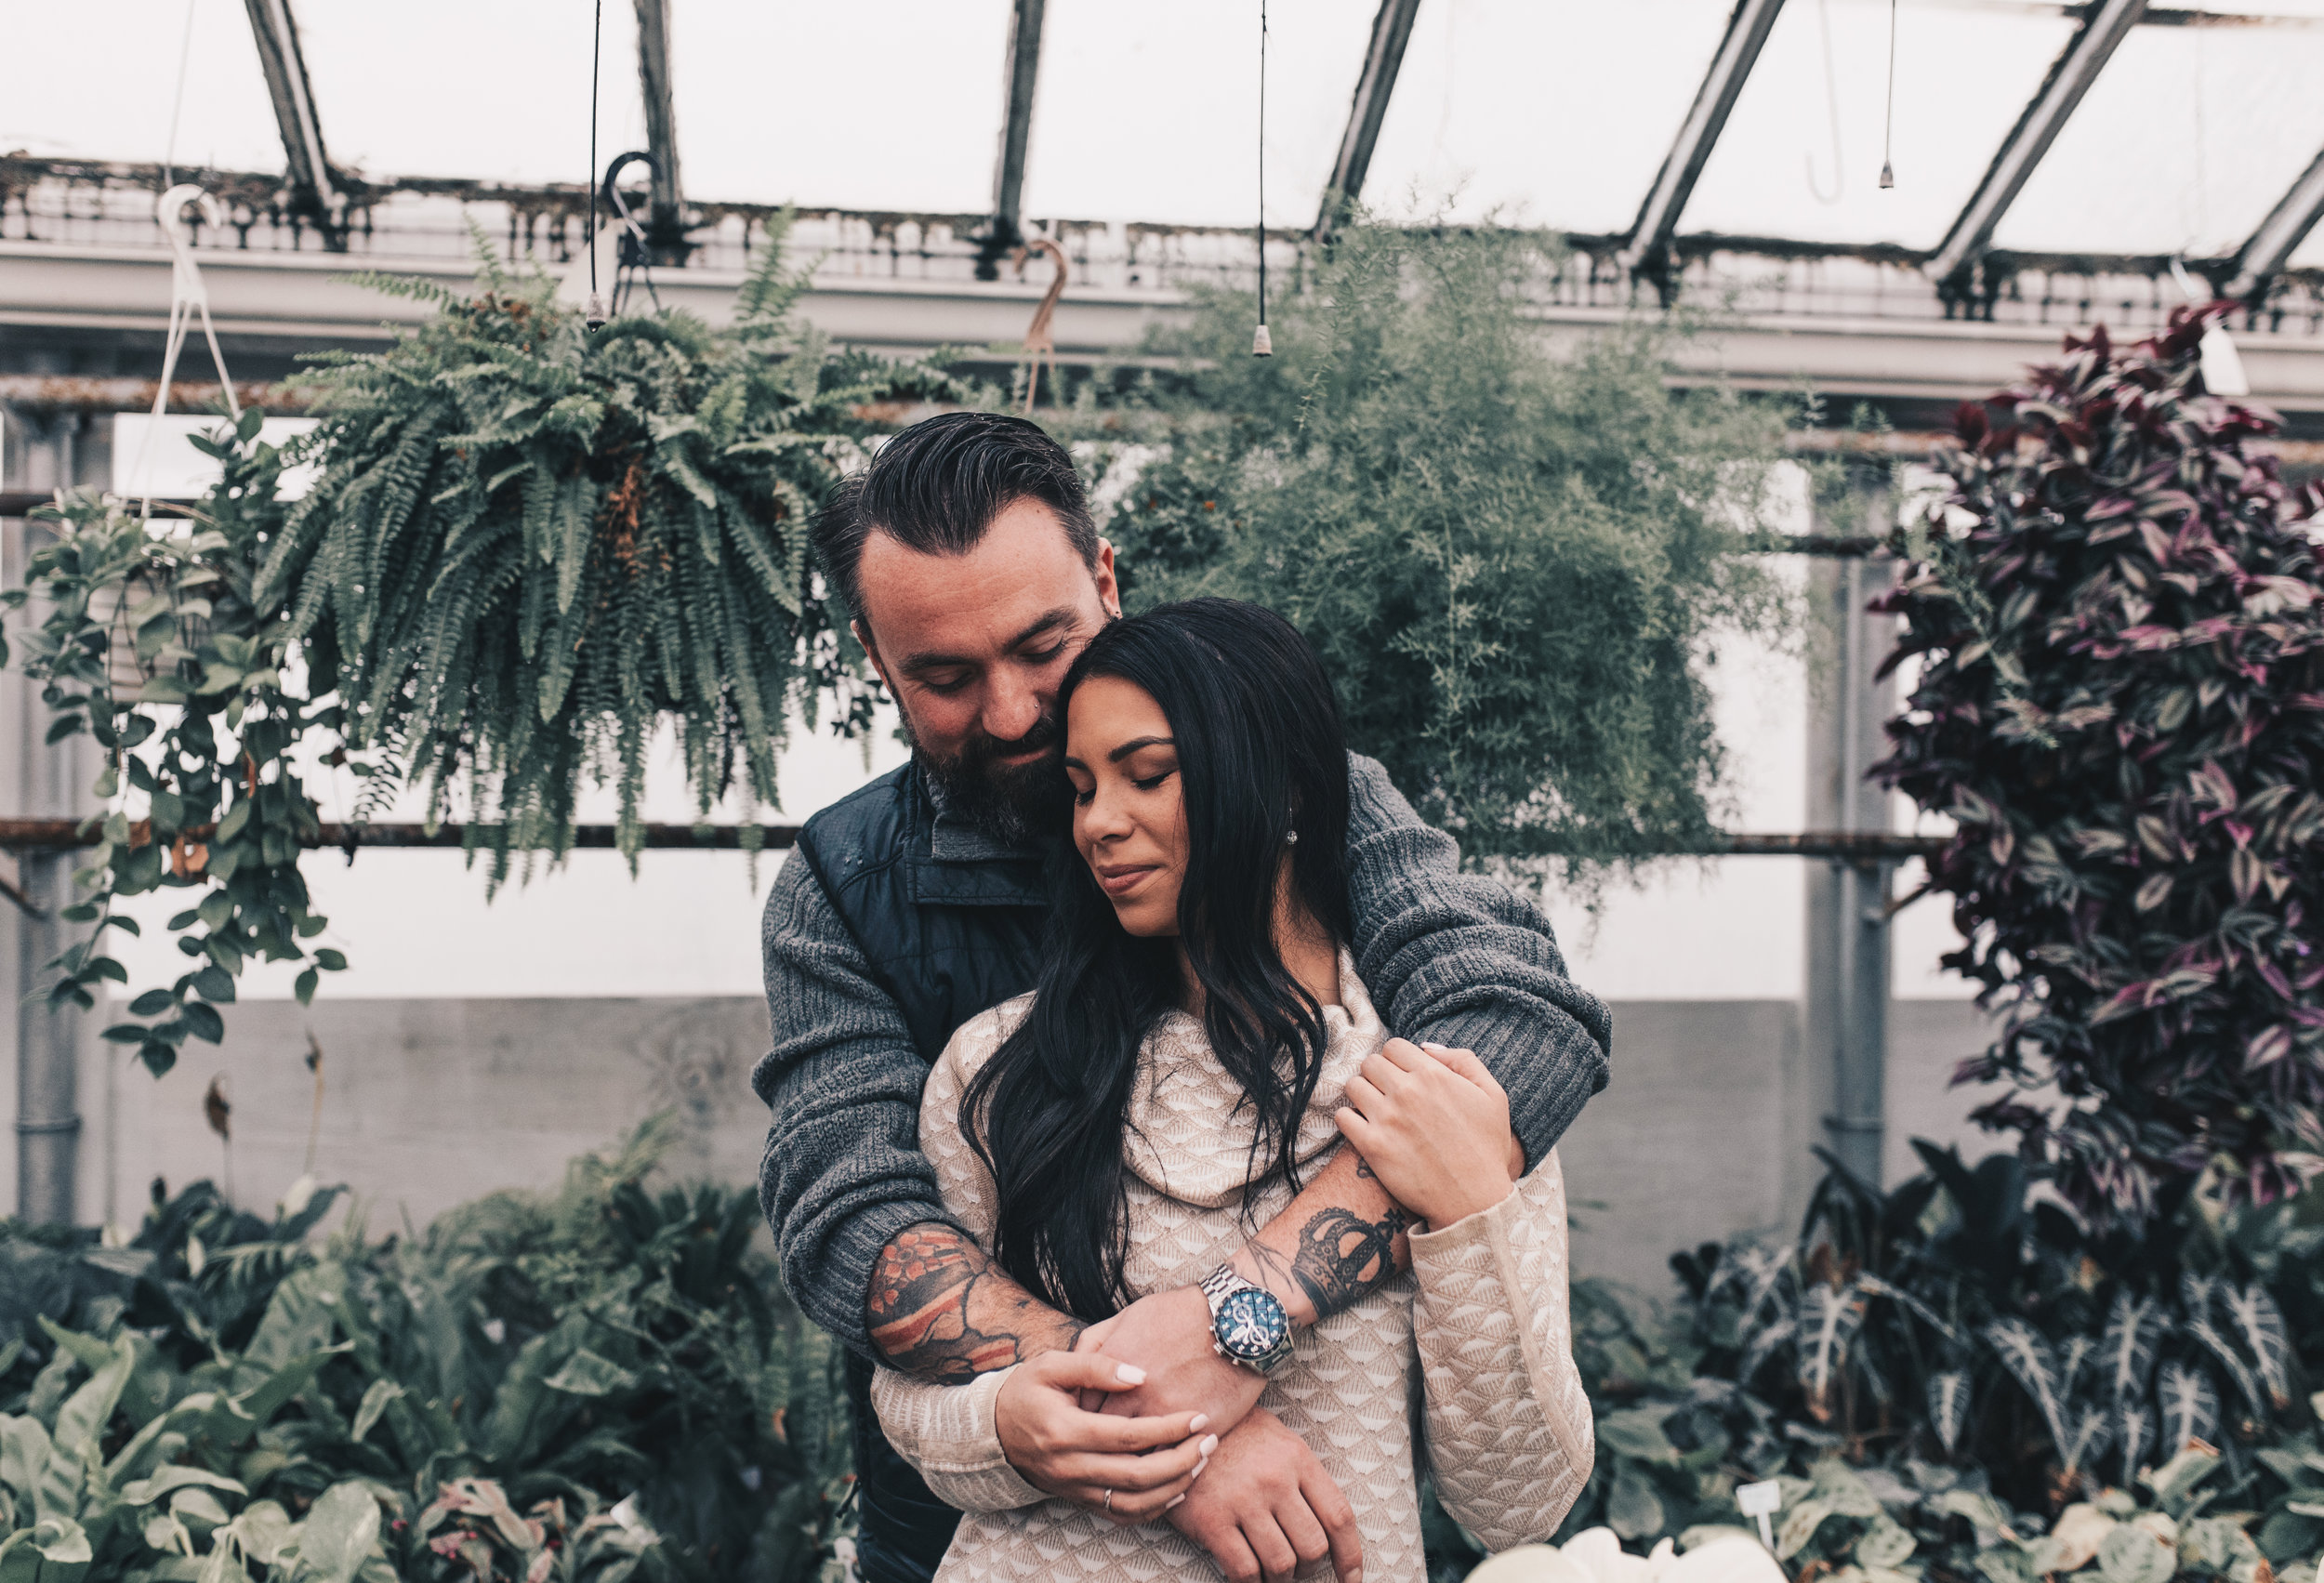 Greenhouse Couples Photography, Greenhouse Engagement Photography, Illinois Photographer